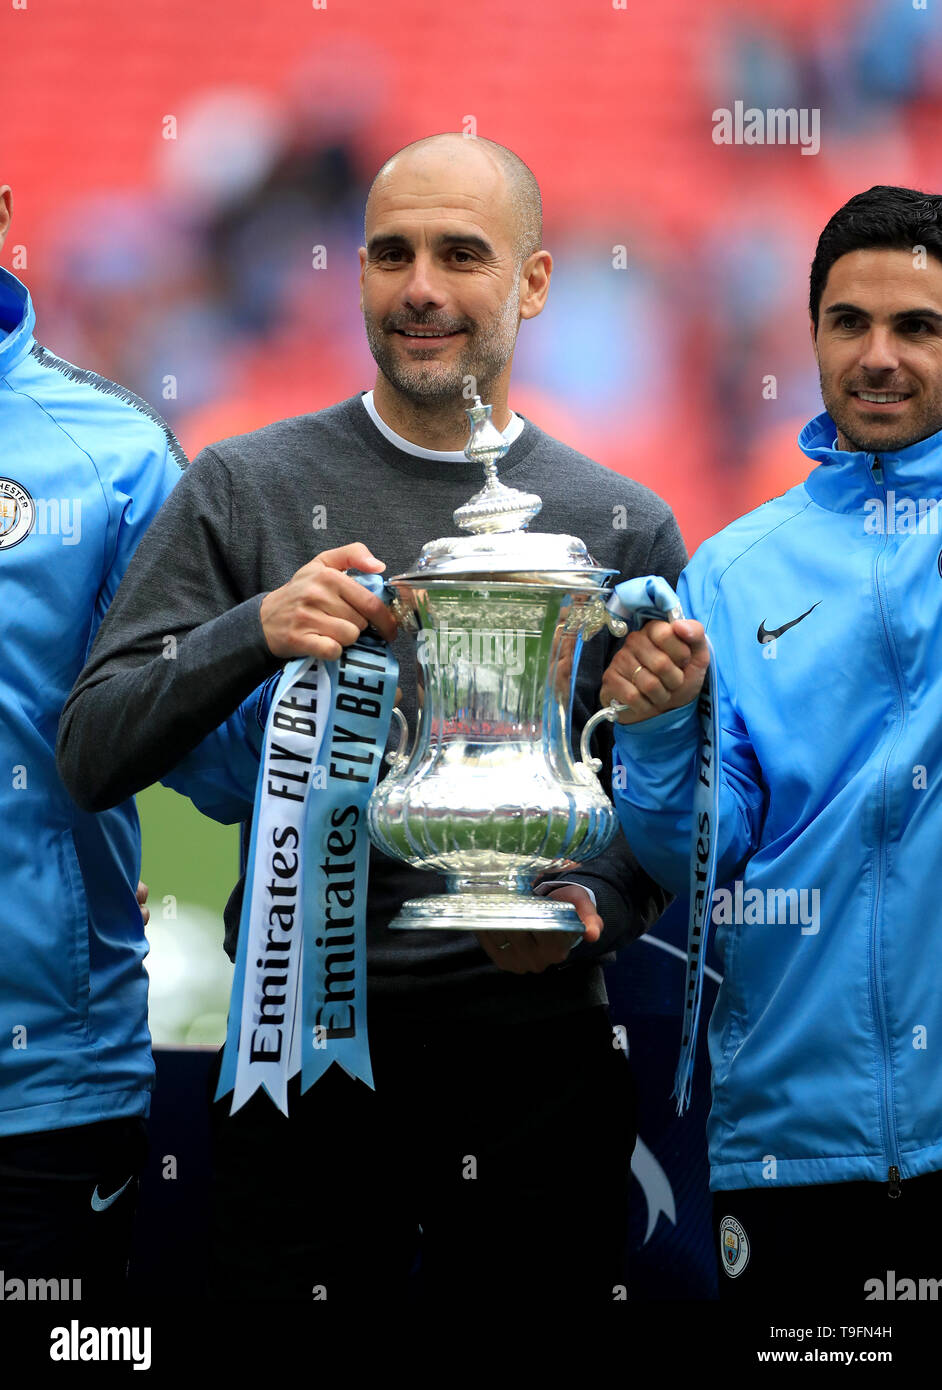 Fortune favours Arsenal as Mikel Arteta finally outdoes Pep Guardiola